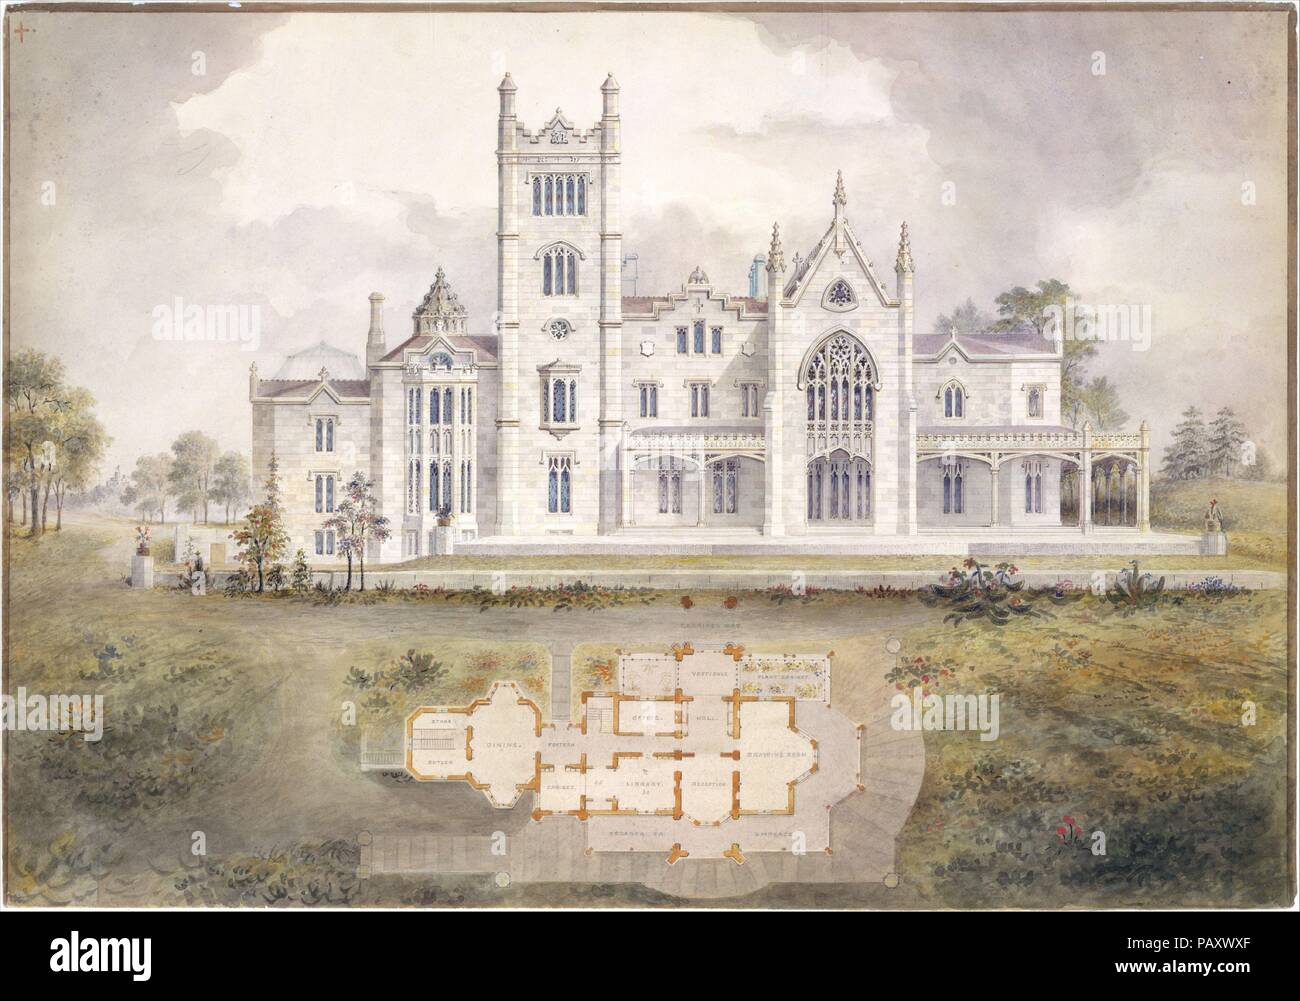 Lyndhurst for George Merritt, Tarrytown, New York (west [rear] elevation and plan). Artist: Alexander Jackson Davis (American, New York 1803-1892 West Orange, New Jersey). Dimensions: Sheet: 18 7/8 x 26 5/8 in. (47.9 x 67.6 cm). Date: 1865.  In 1864, Davis was commissioned by George Merritt to enlarge Knoll, the house he had built for the Paulding family between 1838 and 1842. In essence, he created a new house, the greatest house in the late Gothic Revival style still standing. Dramatically massed, it sits majestically upon a knoll, surrounded by many acres of Downingesque landscape, one of t Stock Photo